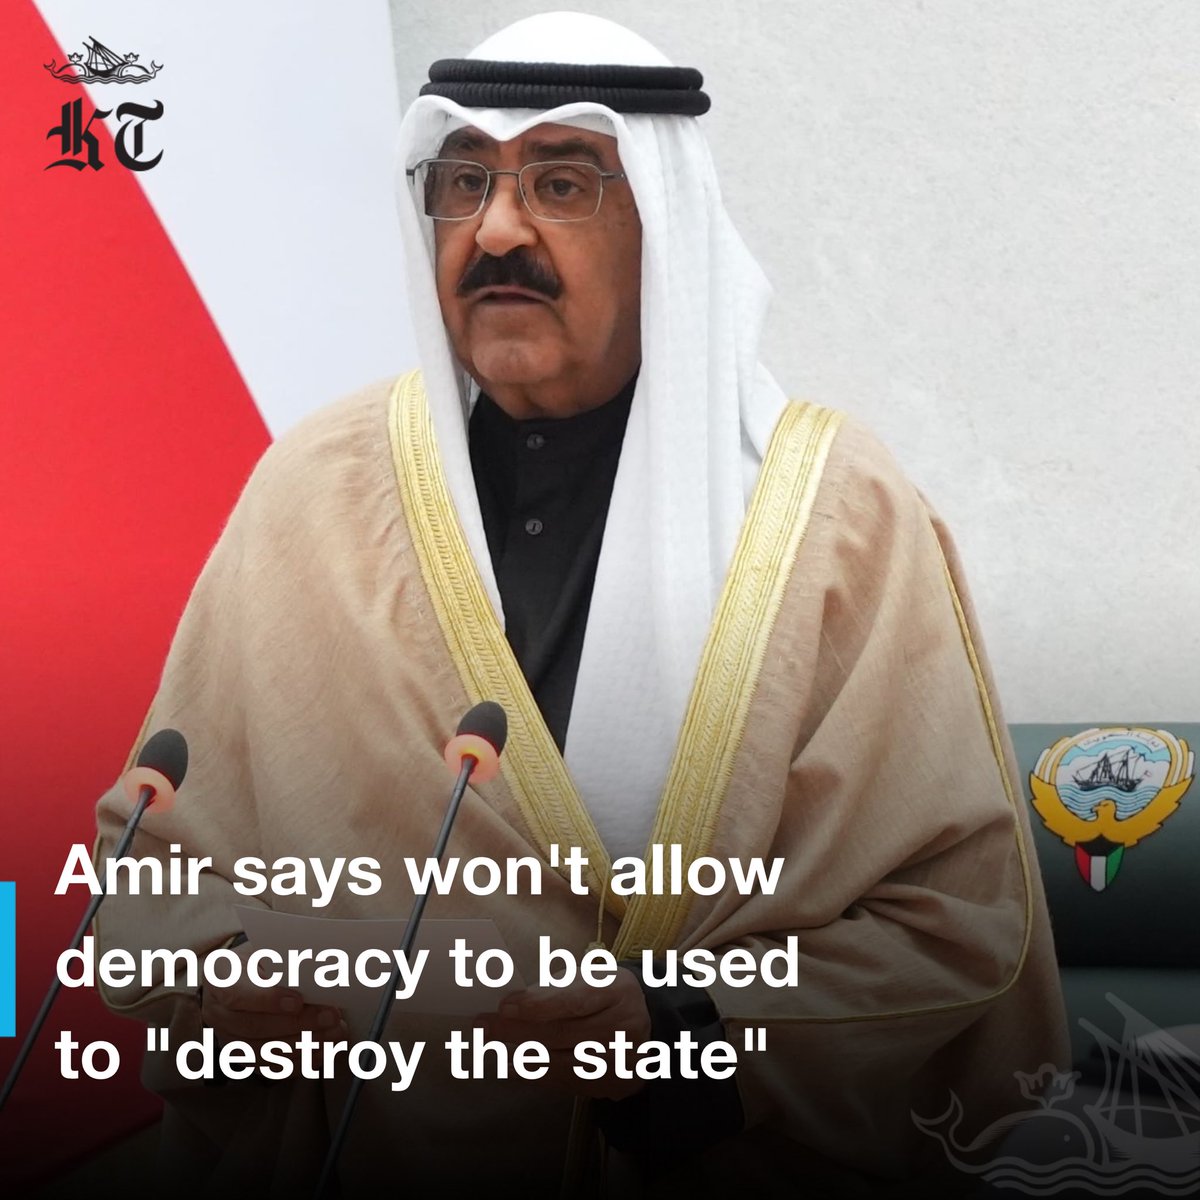 Kuwait has been through tough times that left an impact on various aspects of the country, His Highness the Amir Sheikh Mishal Al-Ahmad Al-Jaber Al-Sabah said in an address to the nation Friday. 'We have faced unimaginable and intolerable difficulties and obstacles,' he said.…